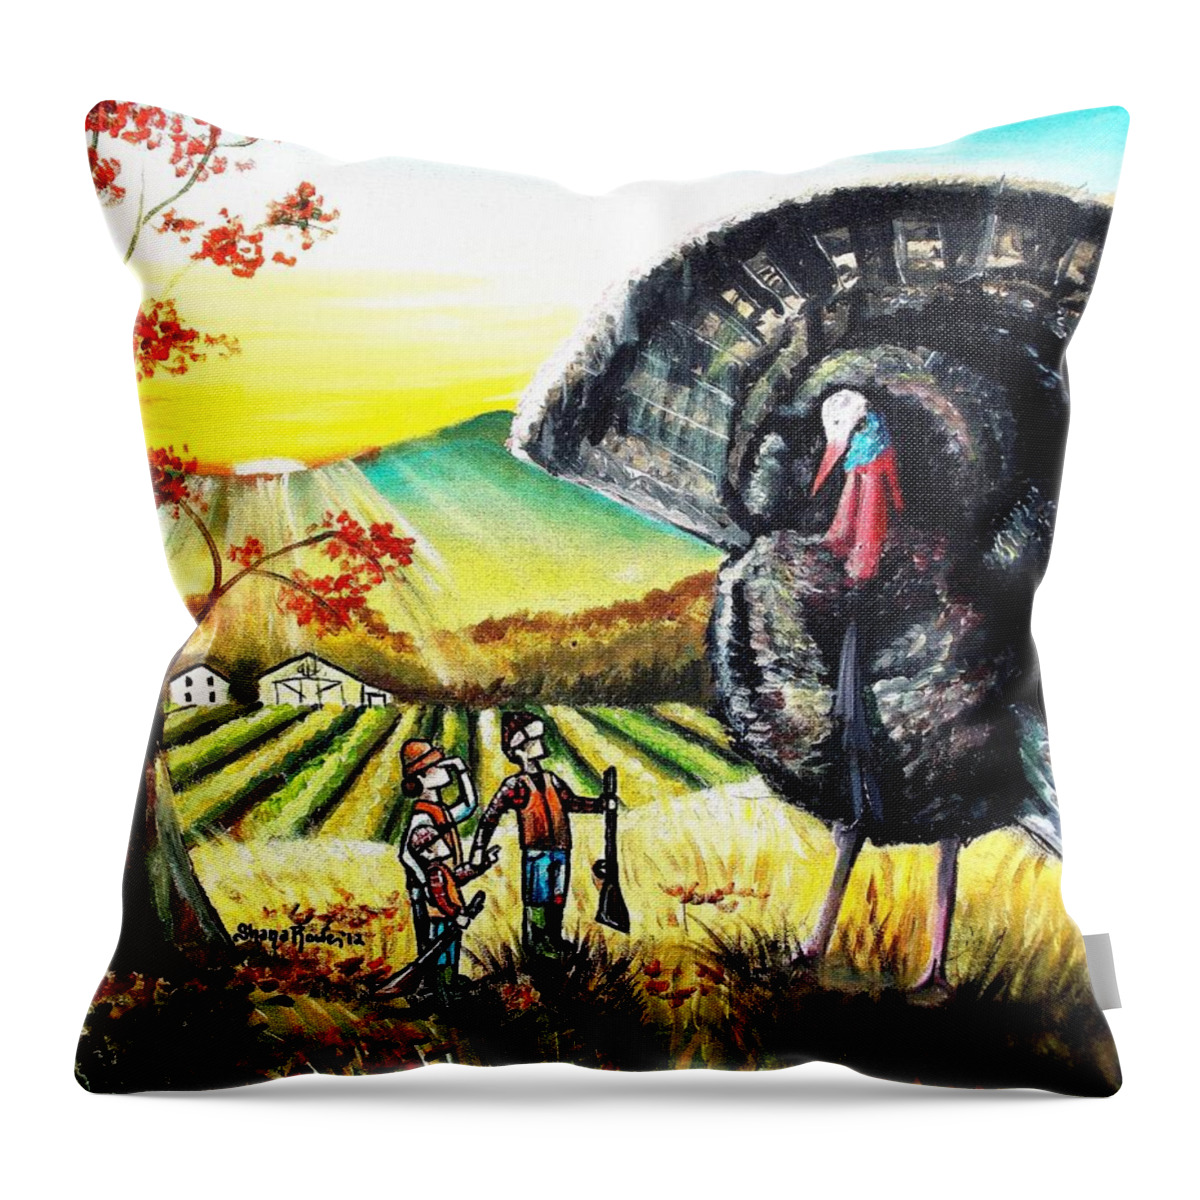 Thanksgiving Throw Pillow featuring the painting Whats for Dinner? by Shana Rowe Jackson